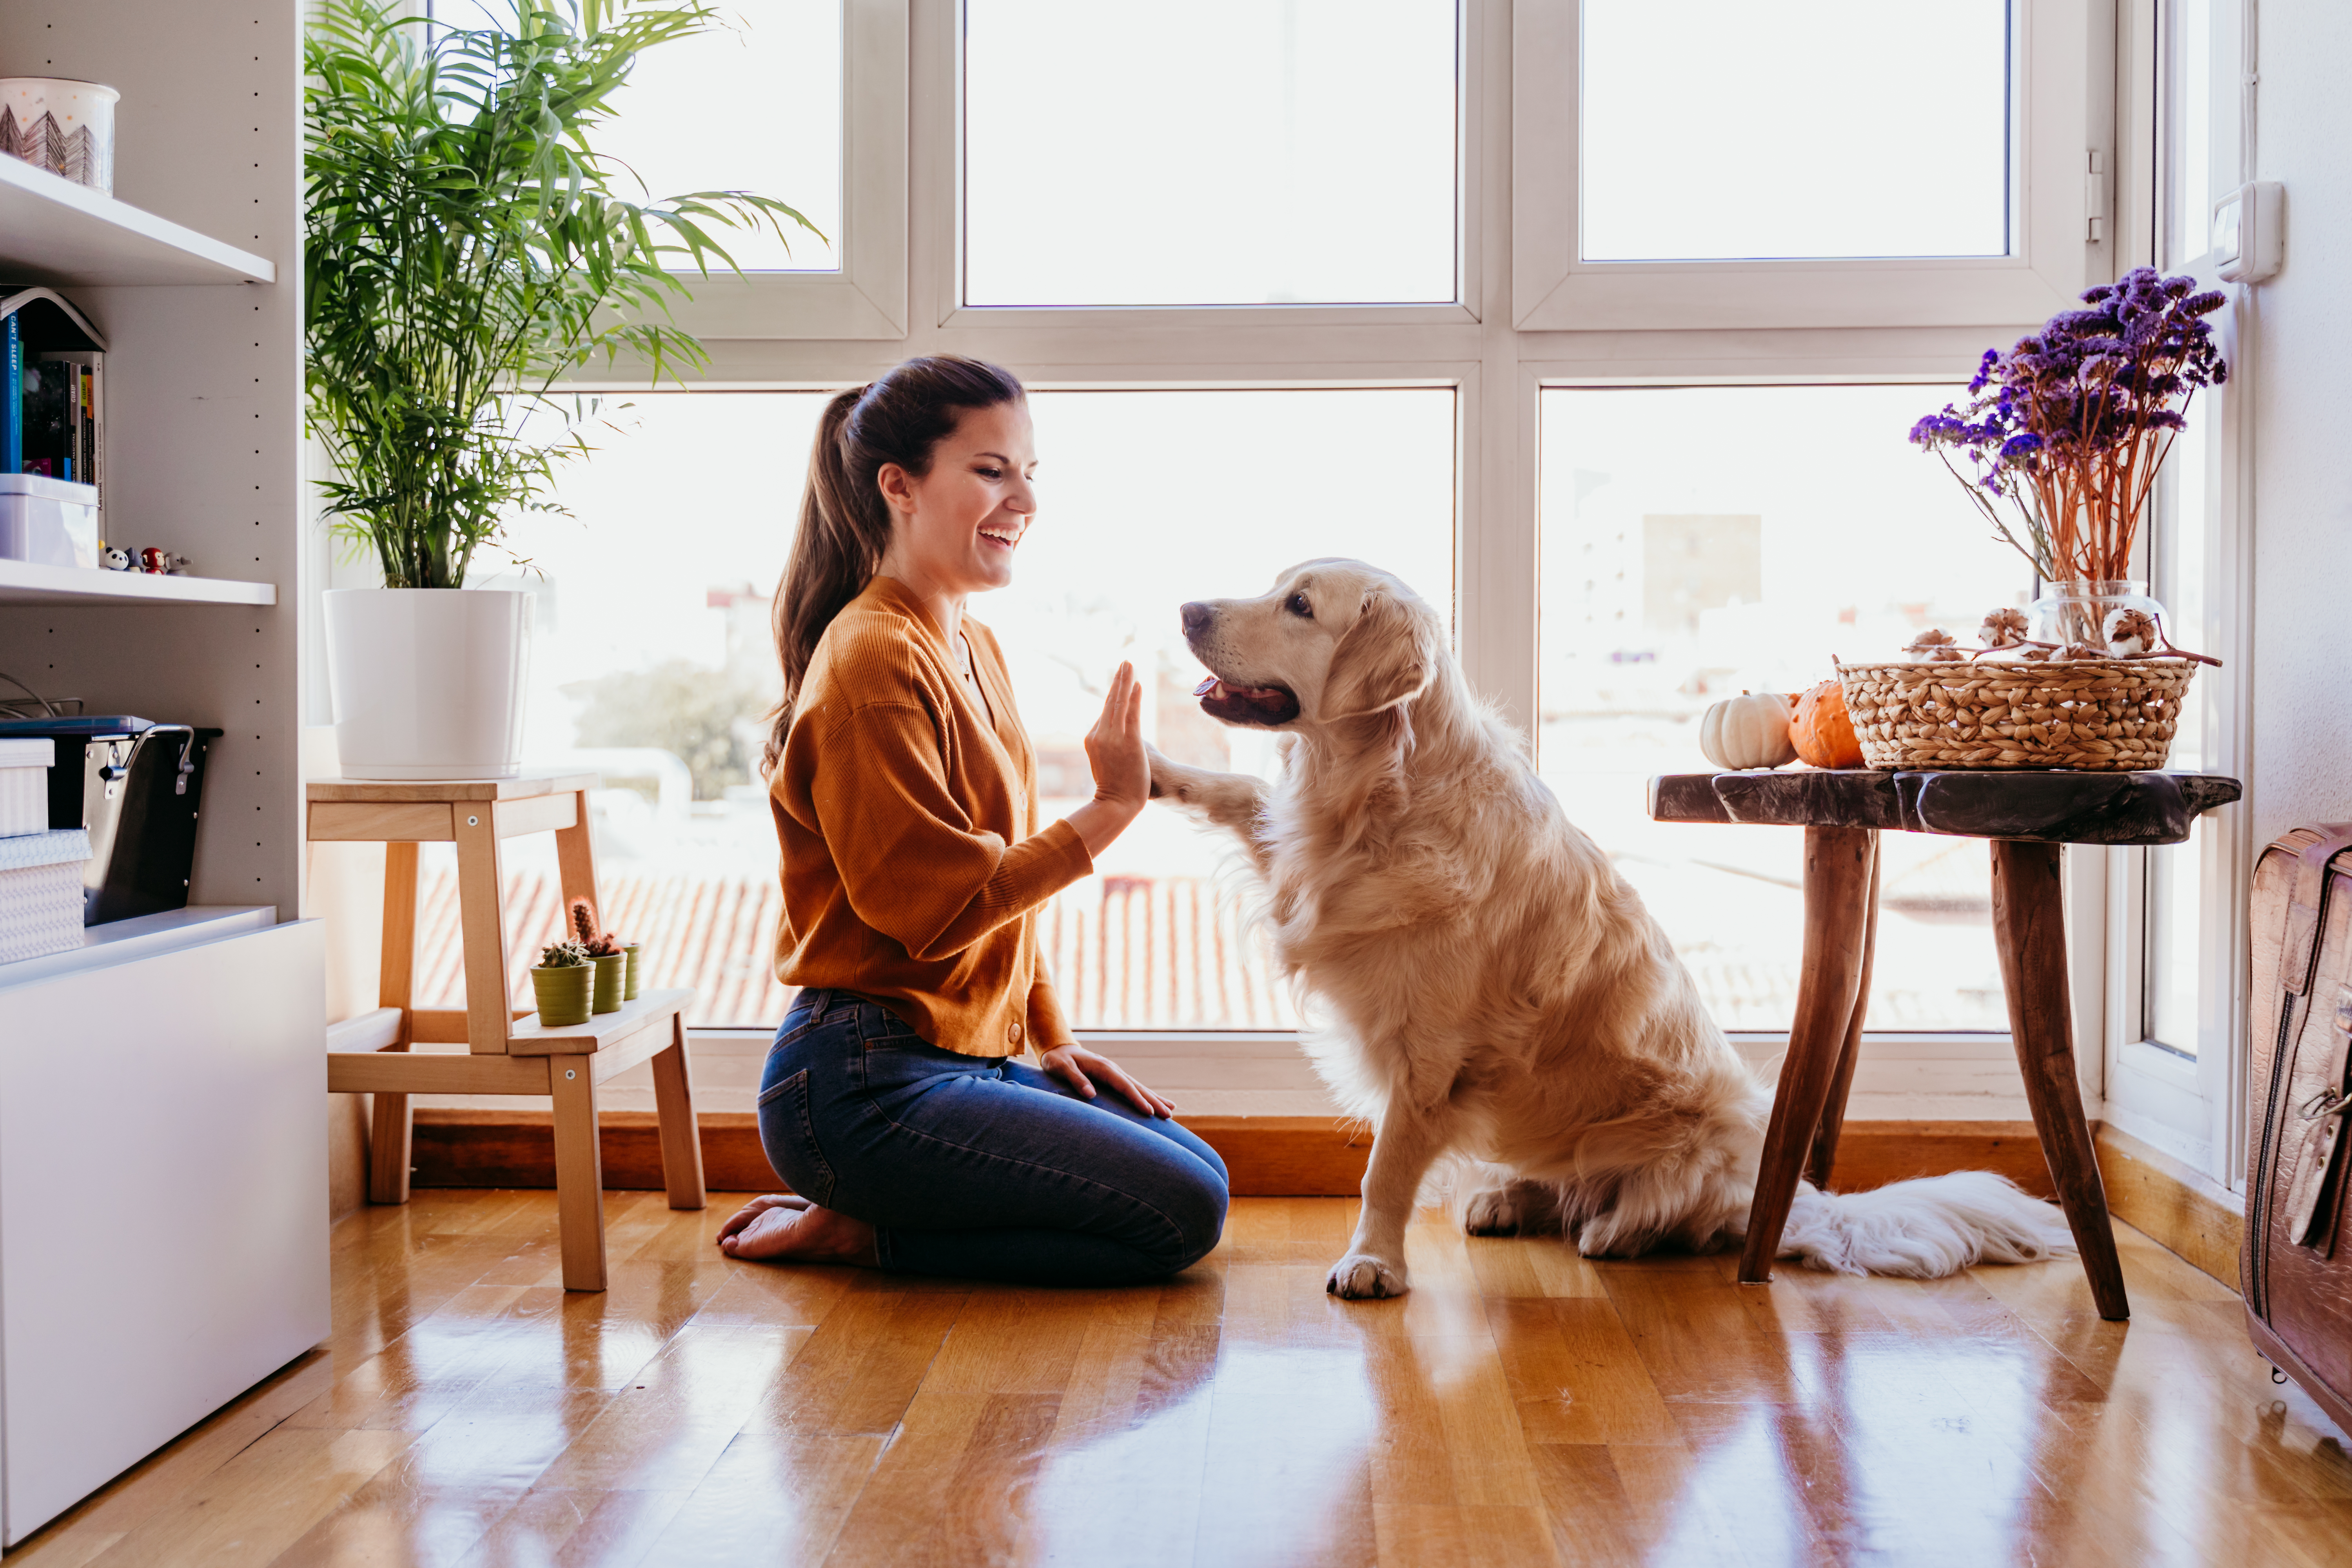 women high-fiving her dog in their home